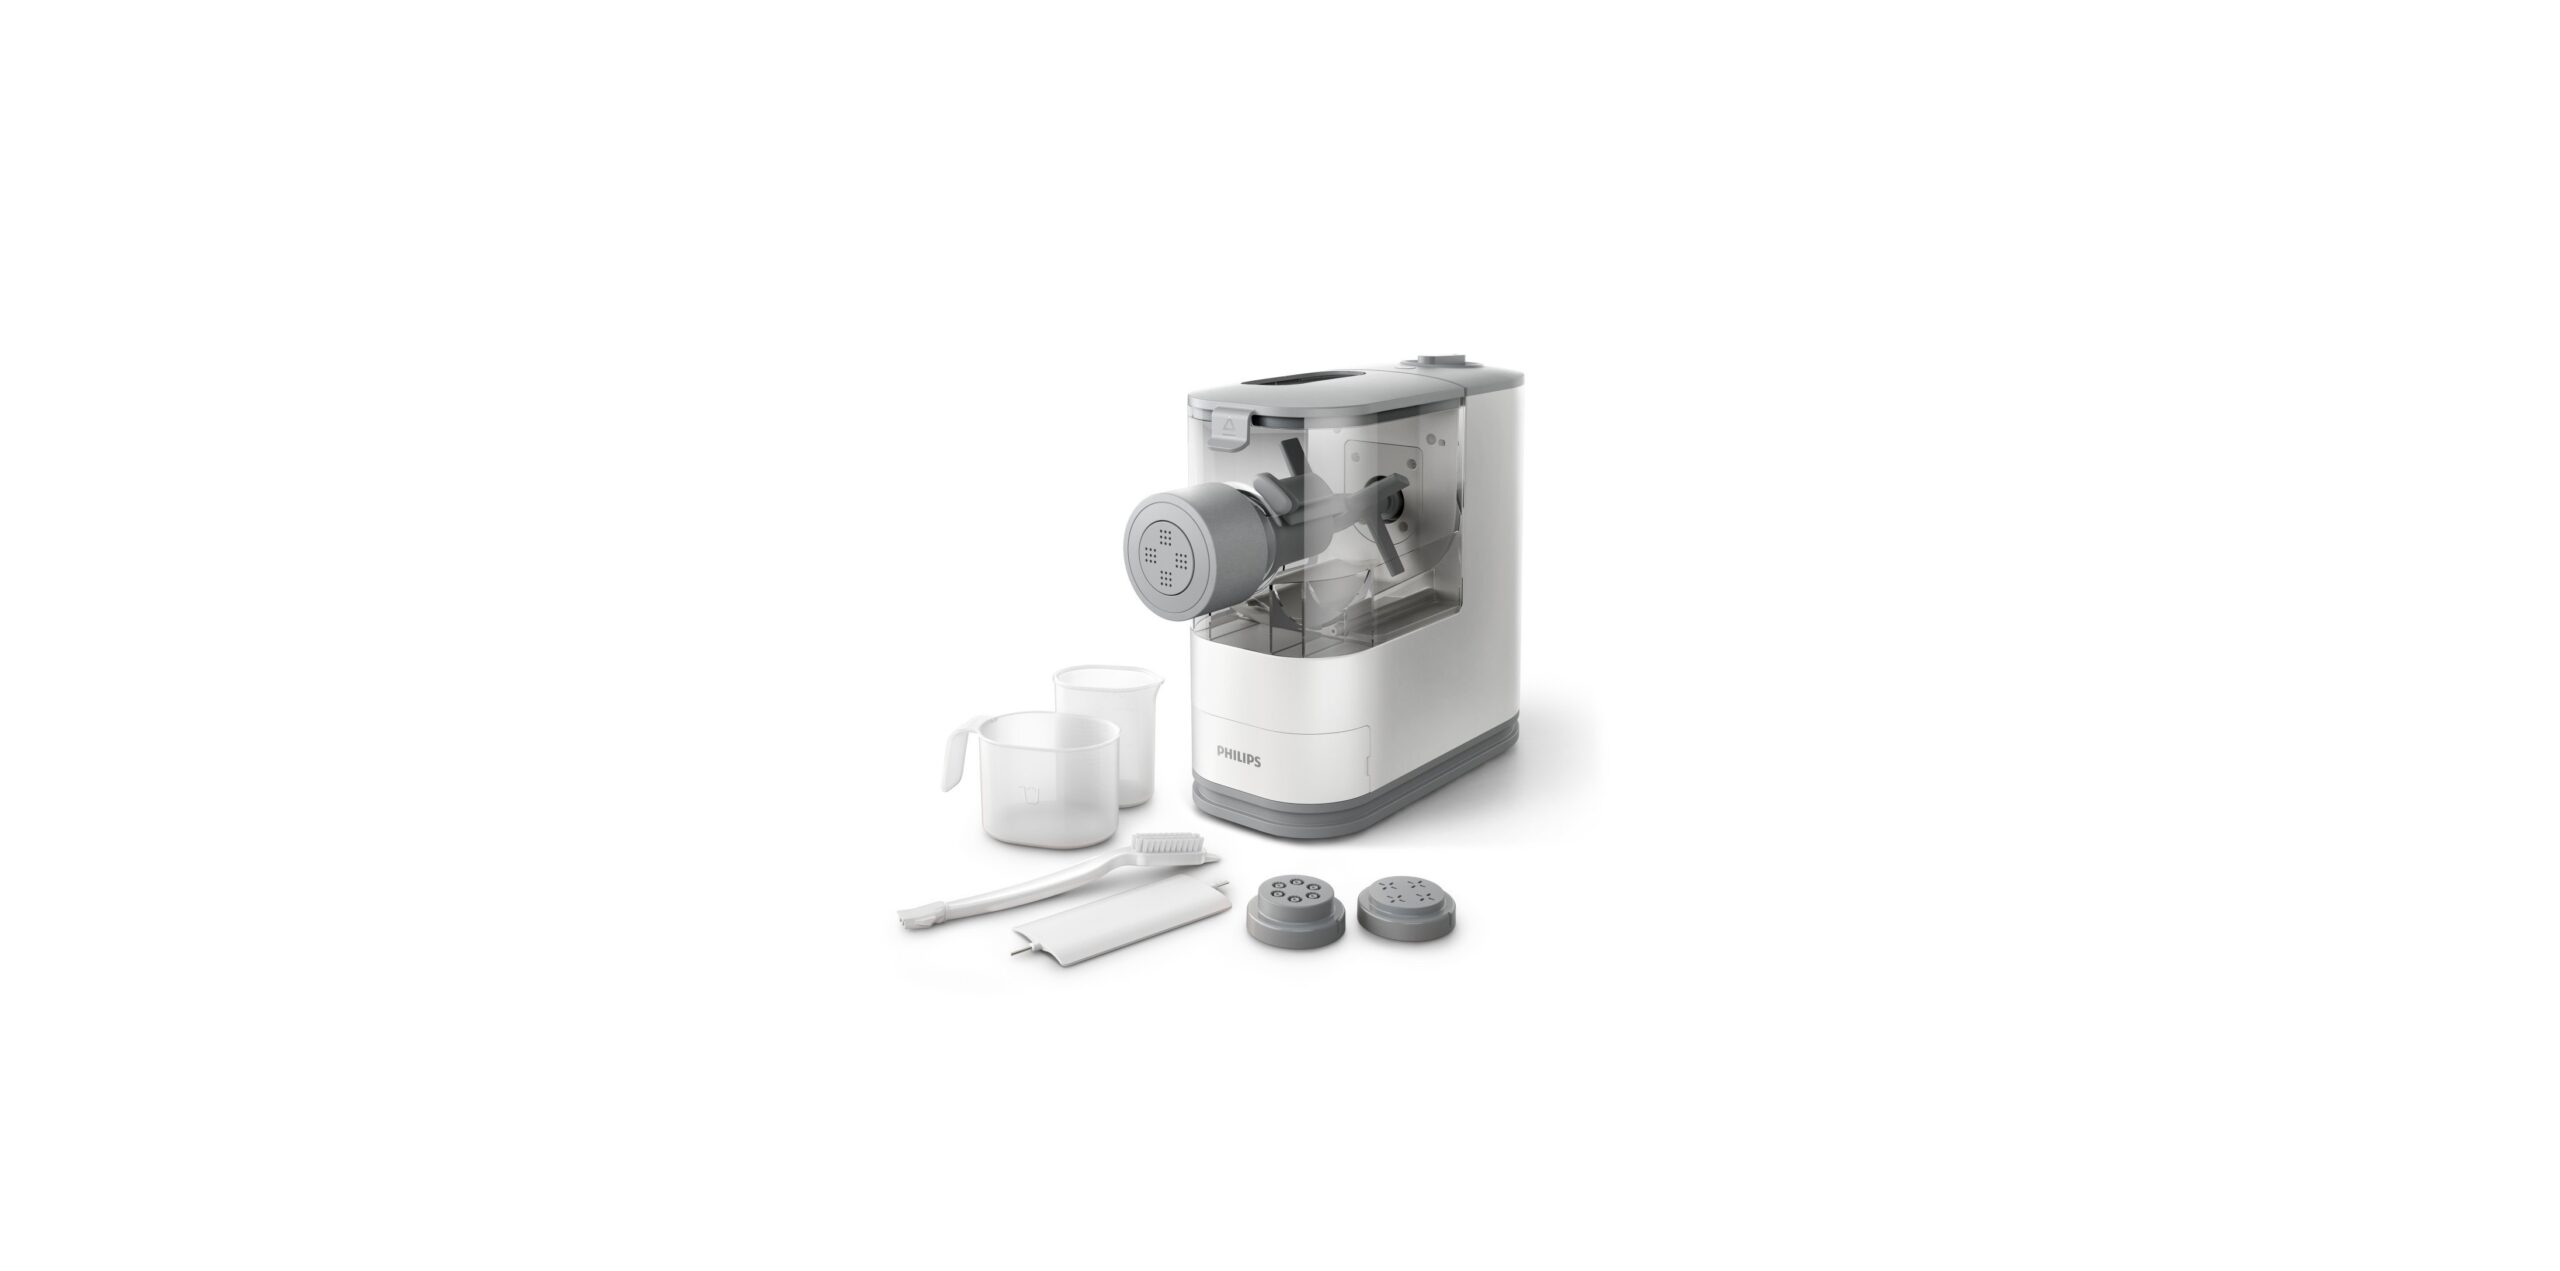 Philips Compact Pasta and Noodle Maker featured